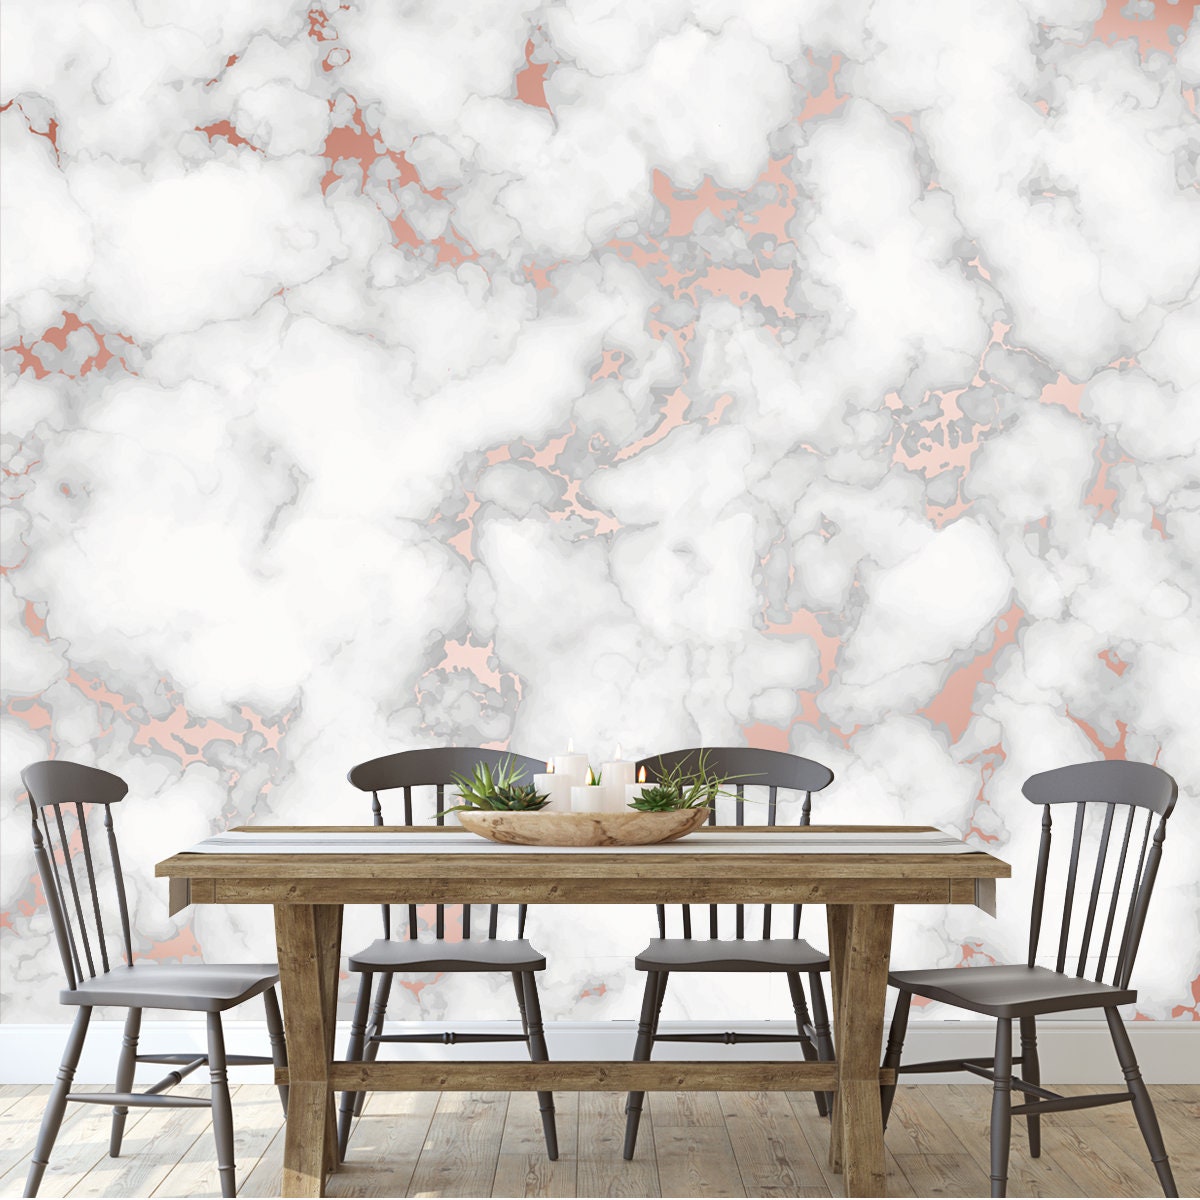 Marble with Rose Gold Texture Background. Beautiful Abstract Marble Pattern with High Resolution Wallpaper Dining Room Mural